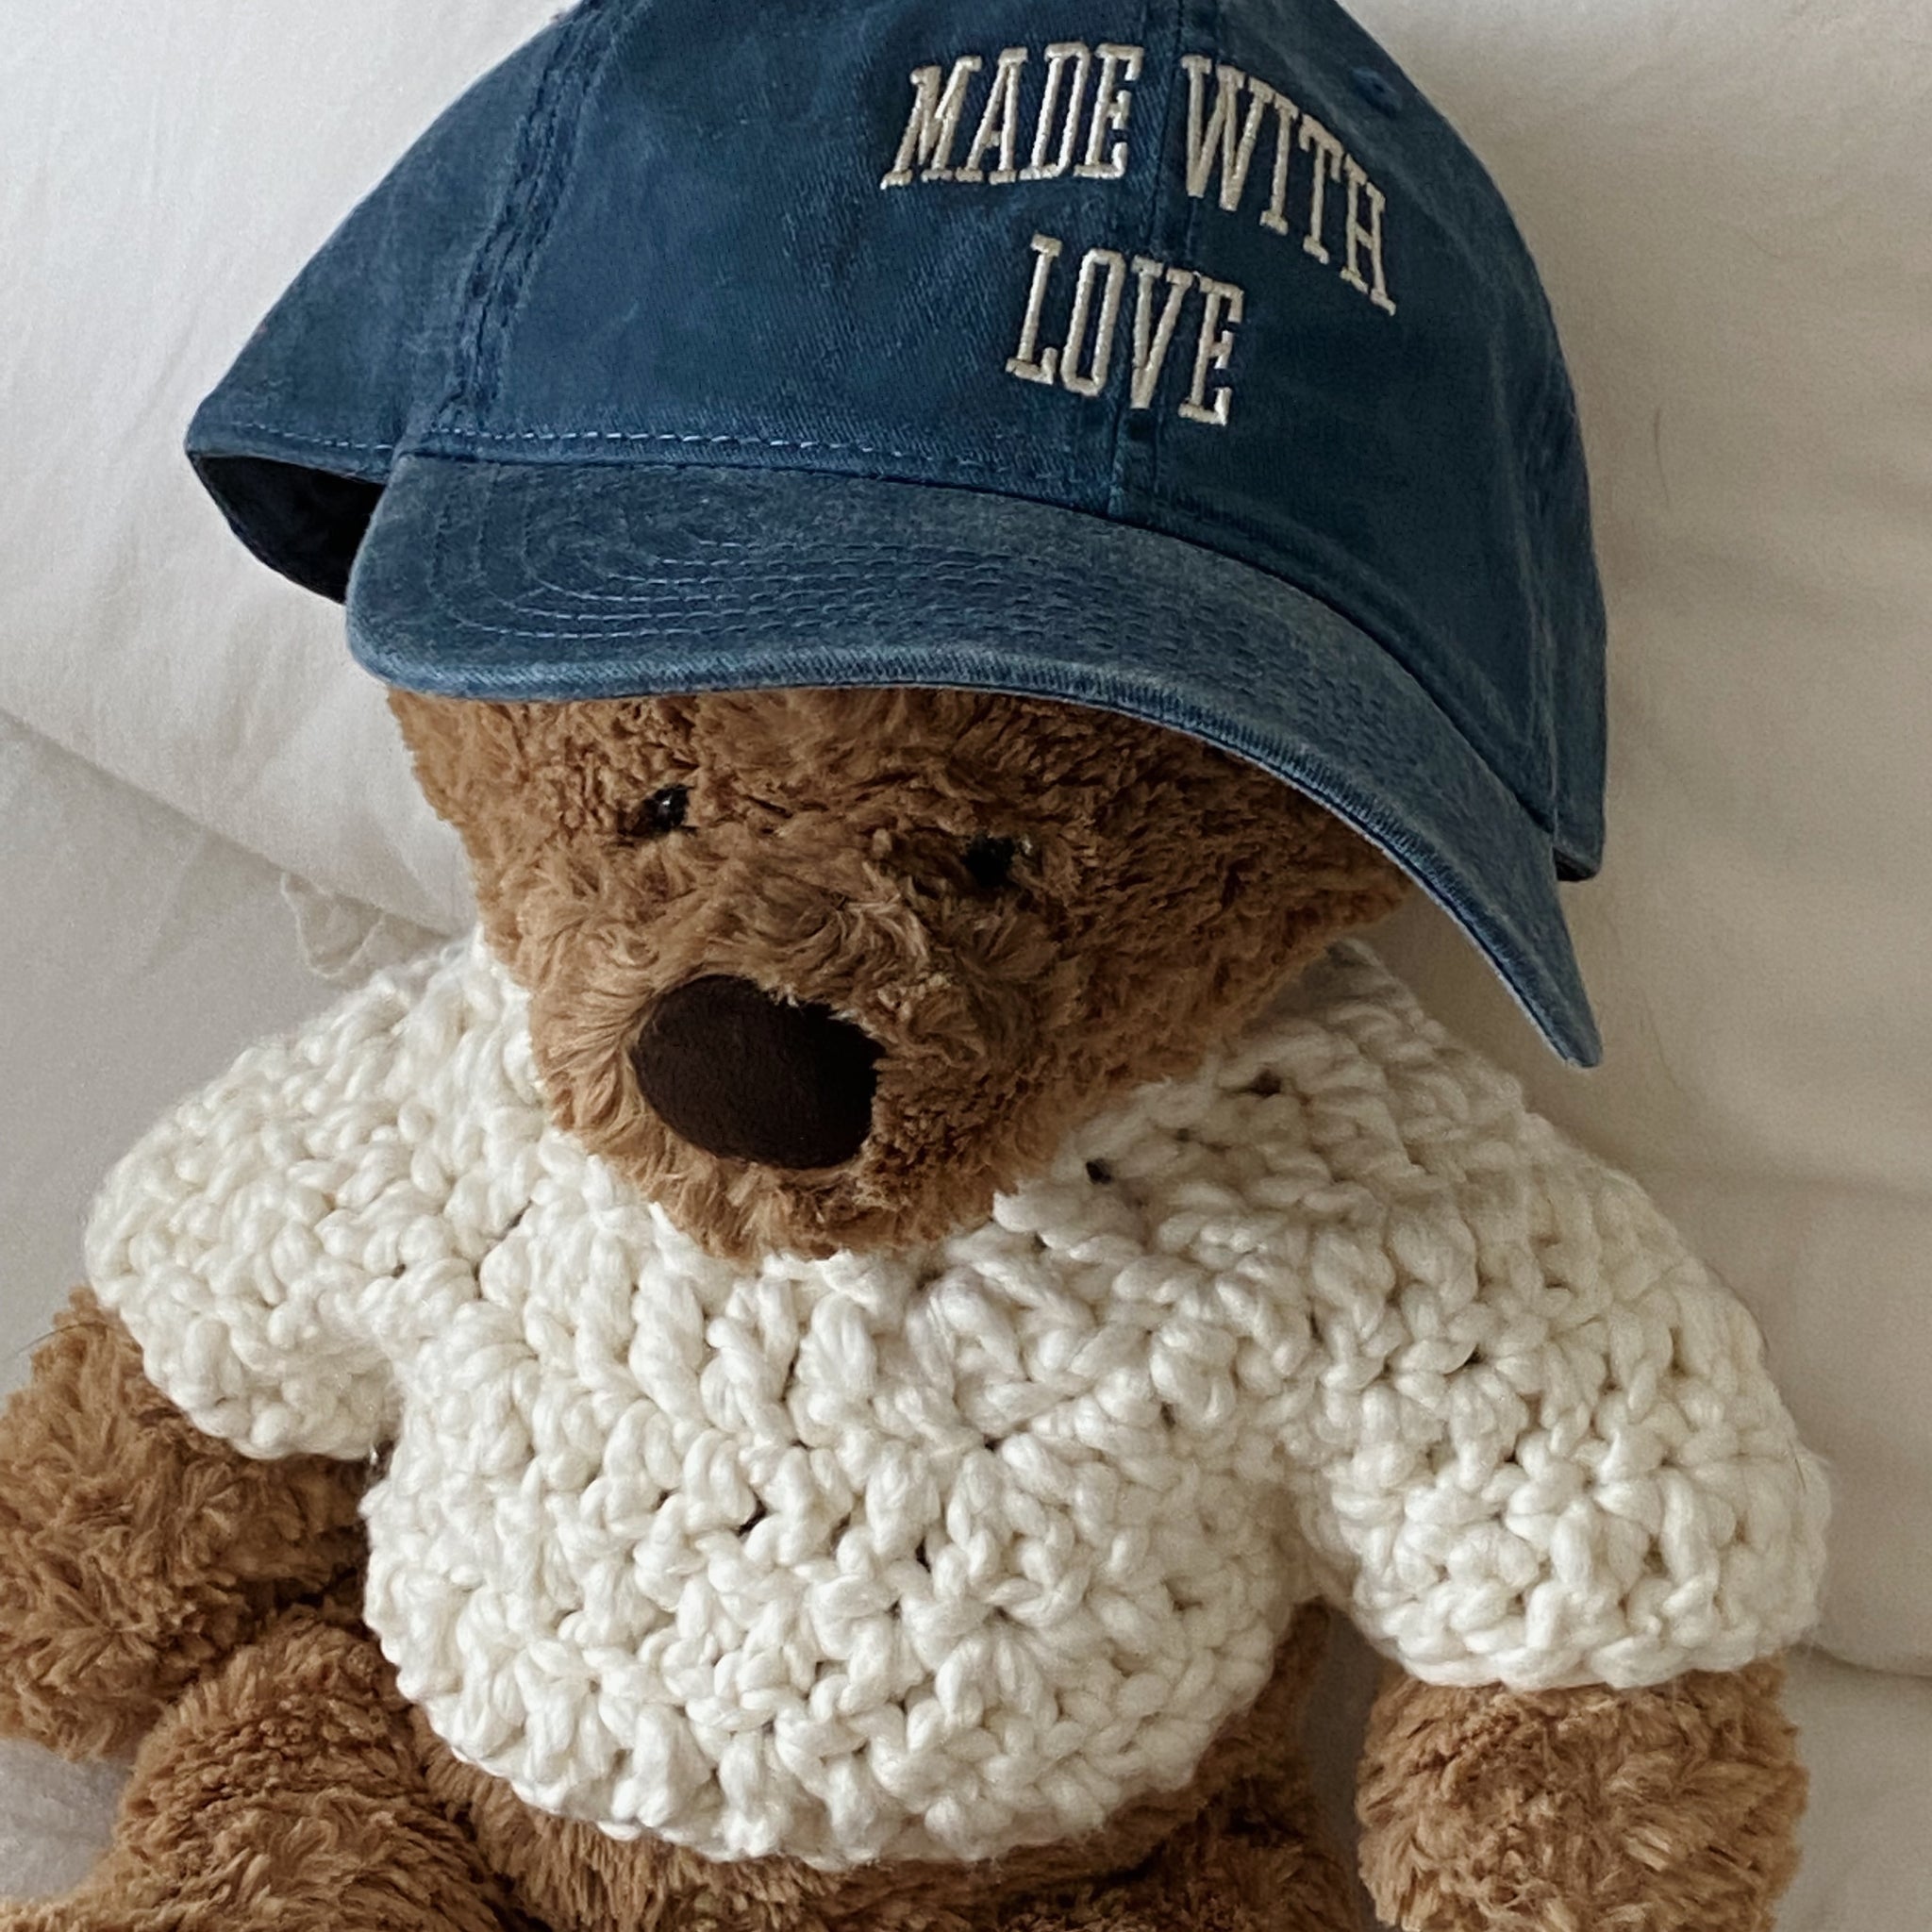 "MADE WITH LOVE" HAT